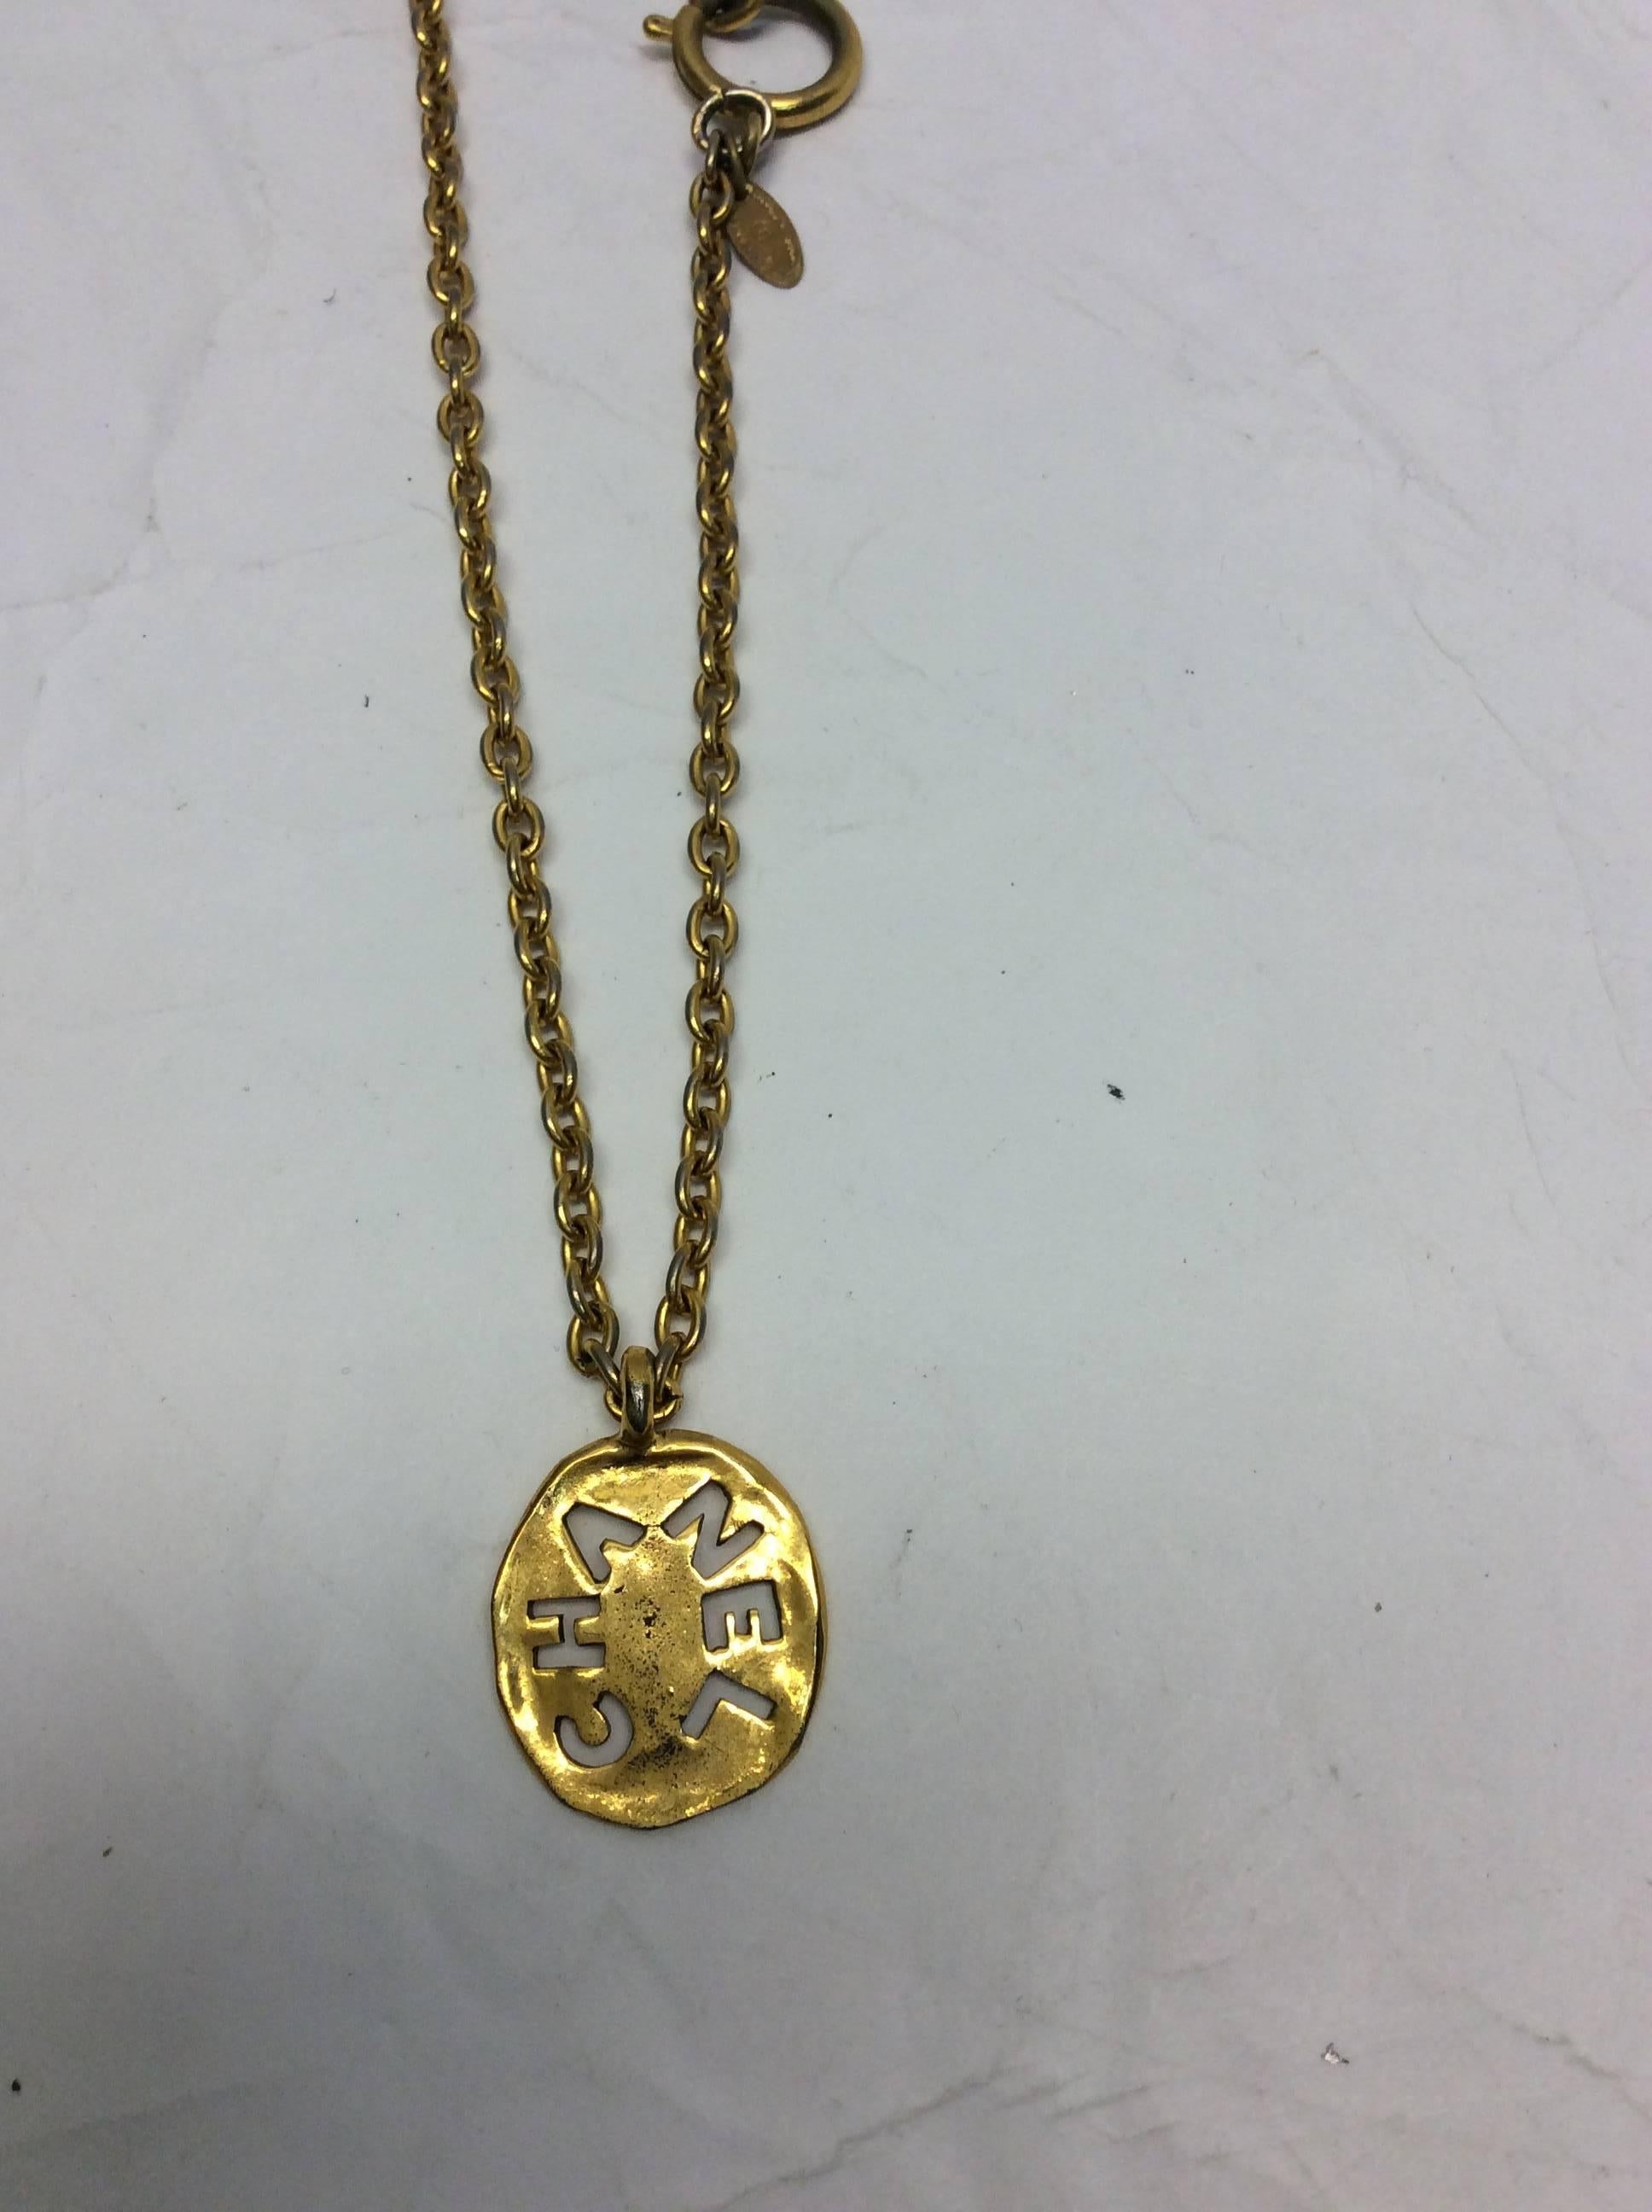 Chanel Gold Coin Pendant Necklace In Excellent Condition For Sale In Narberth, PA